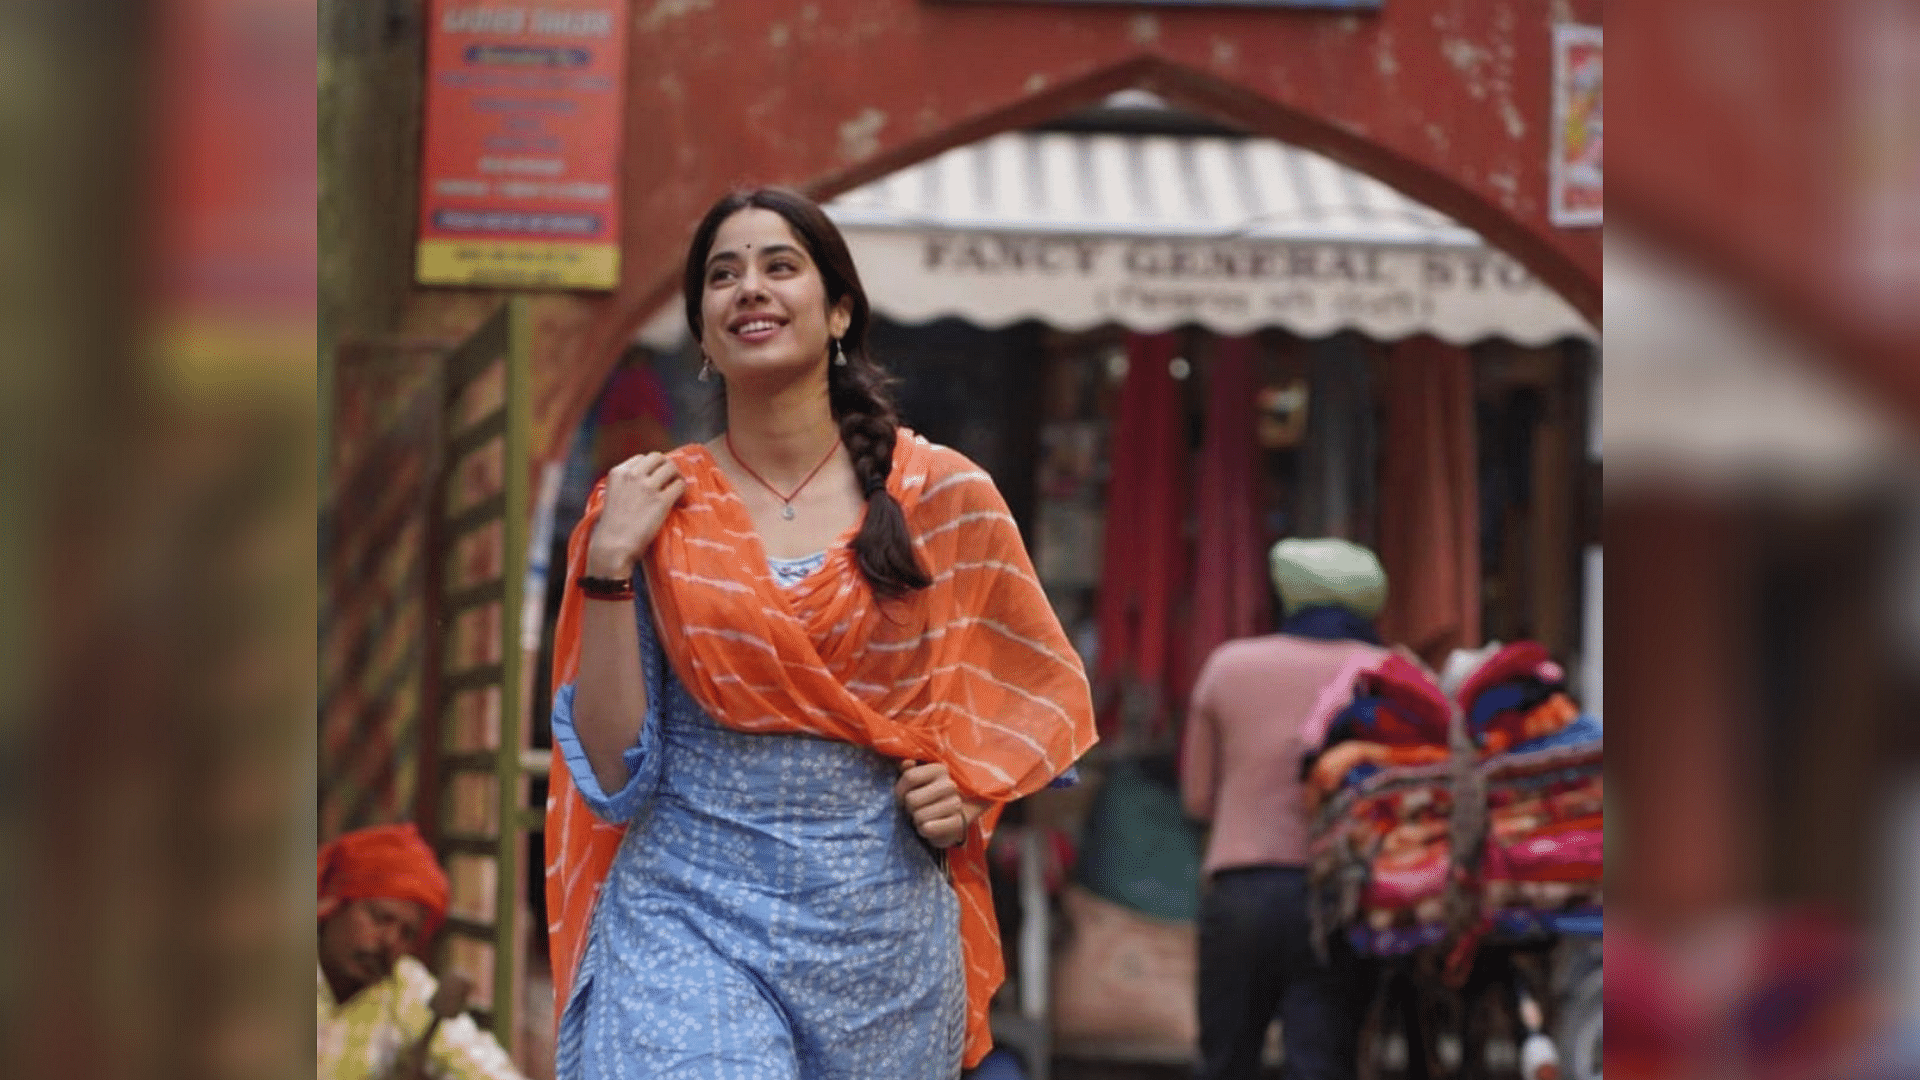 The shoot for Janhvi Kapoor's film <i>Good Luck Jerry</i> was briefly disrupted by farmers in Punjab.